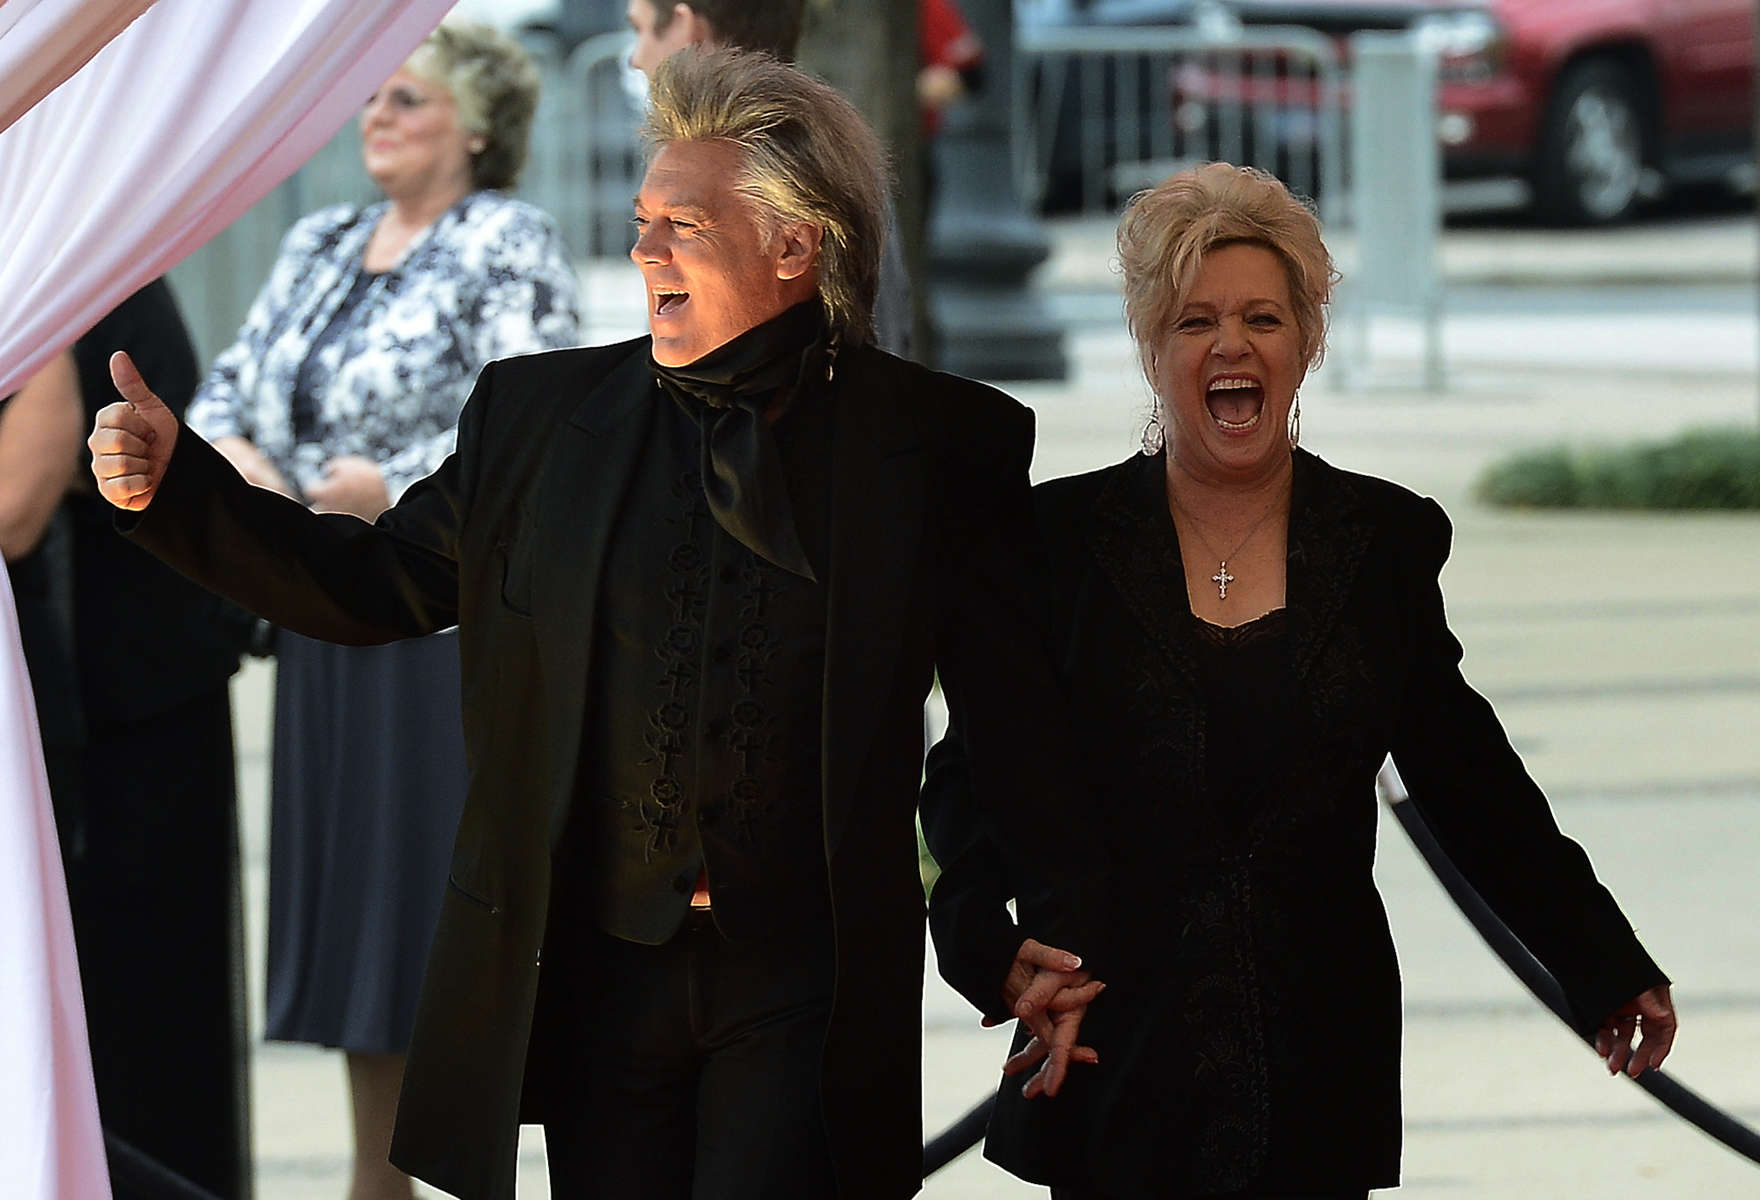 Marty Stuart and Connie Smith arrive at the ceremony for the 2013 inductions into the Country Music Hall of Fame in Nashville, Tenn. The inductees are Bobby Bare, the late “Cowboy” Jack Clement and Kenny Rogers. (AP Photo/ Mark Zaleski)